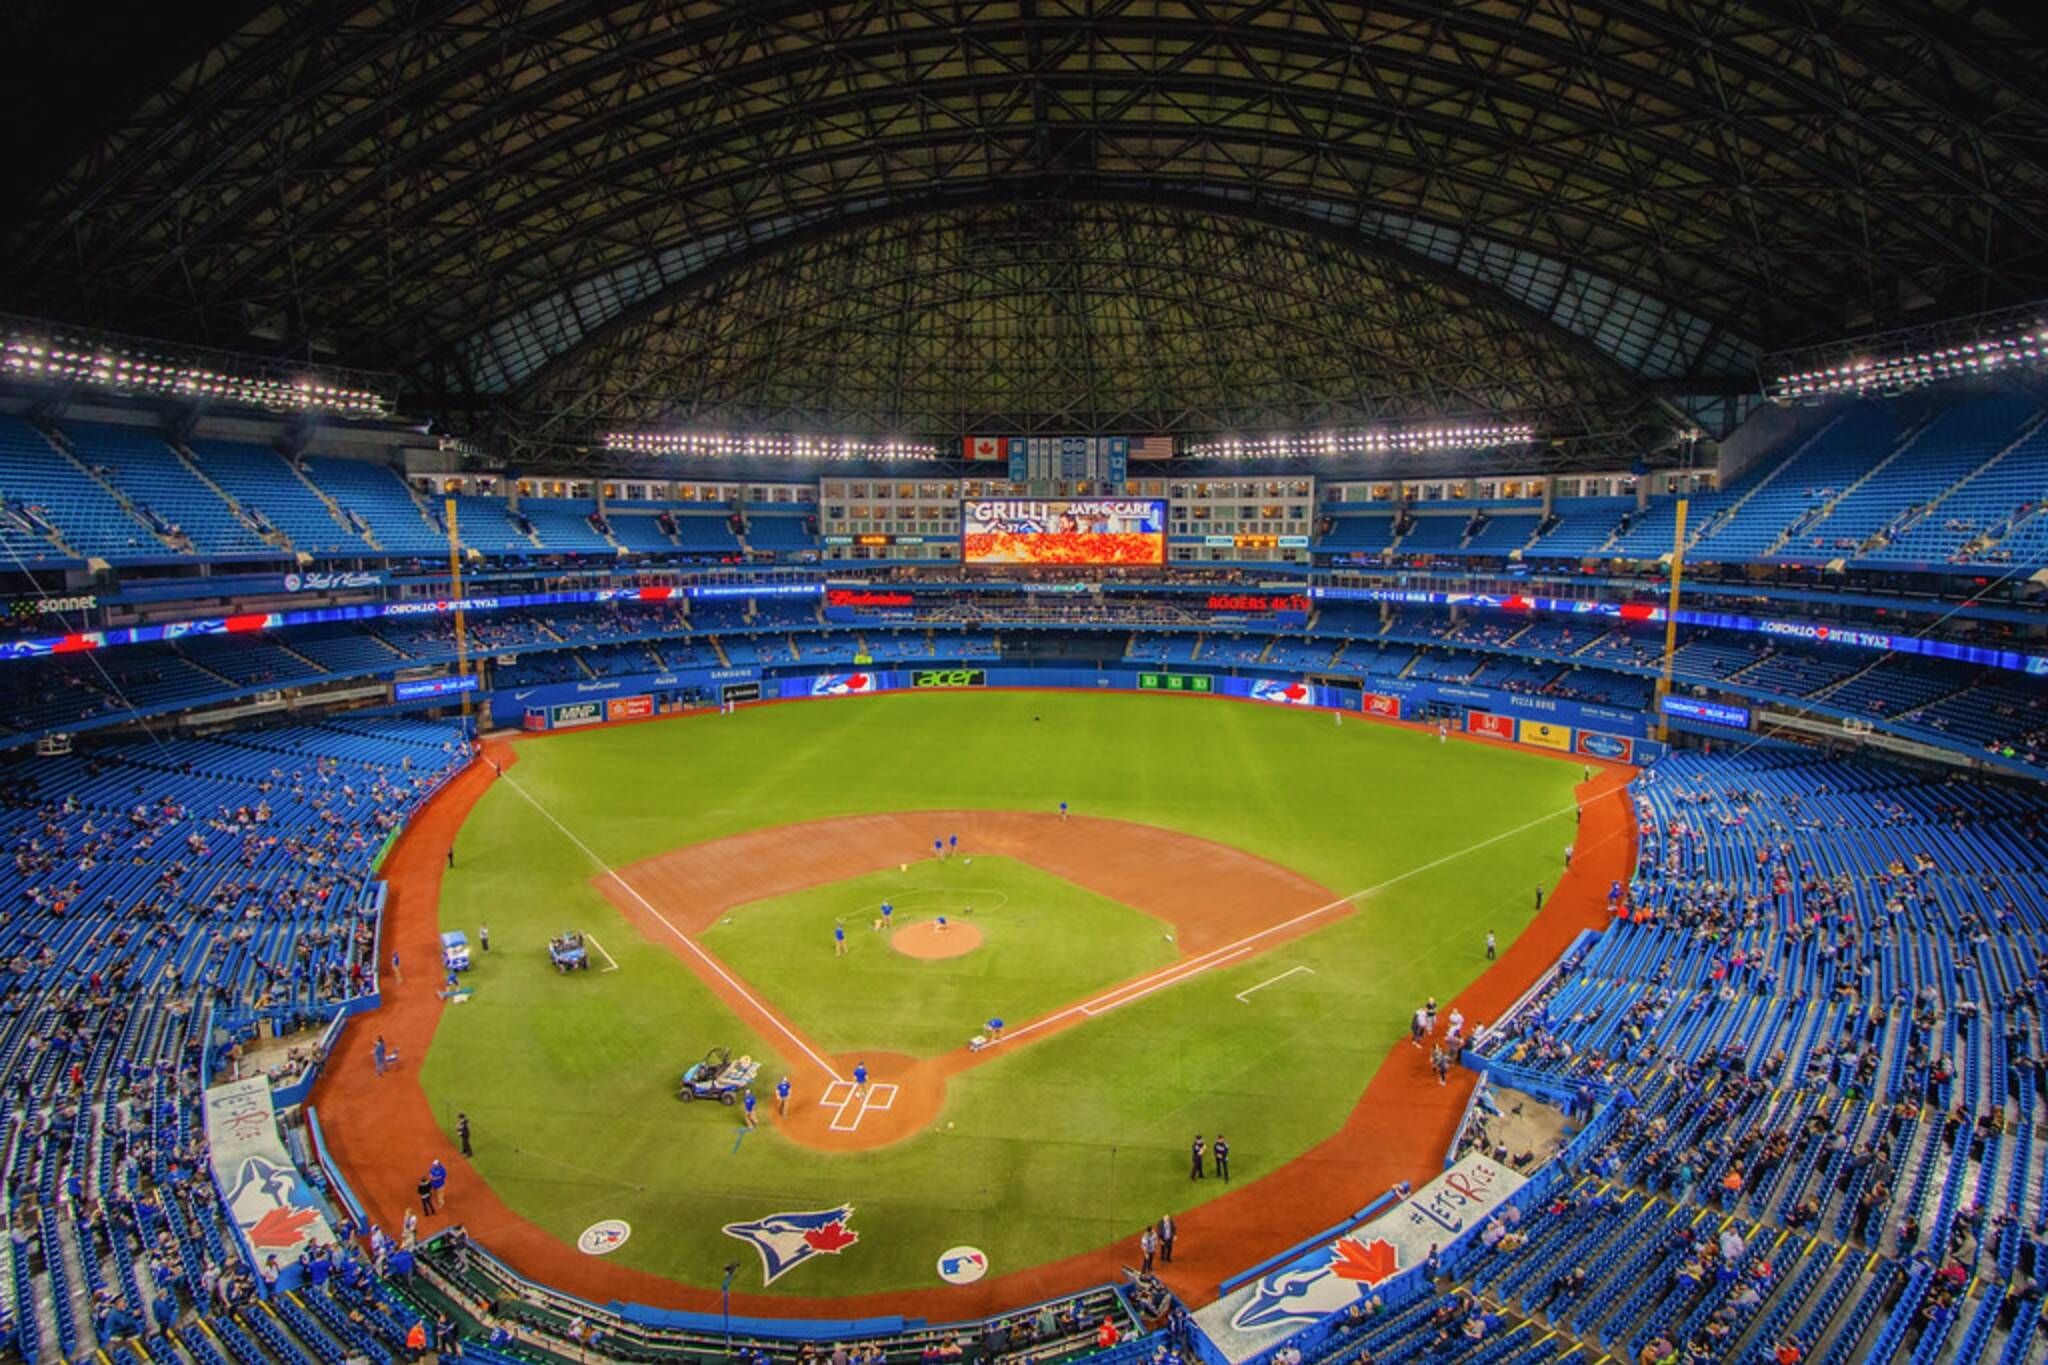 Rogers Centre to be demolished, new stadium built for Blue Jays